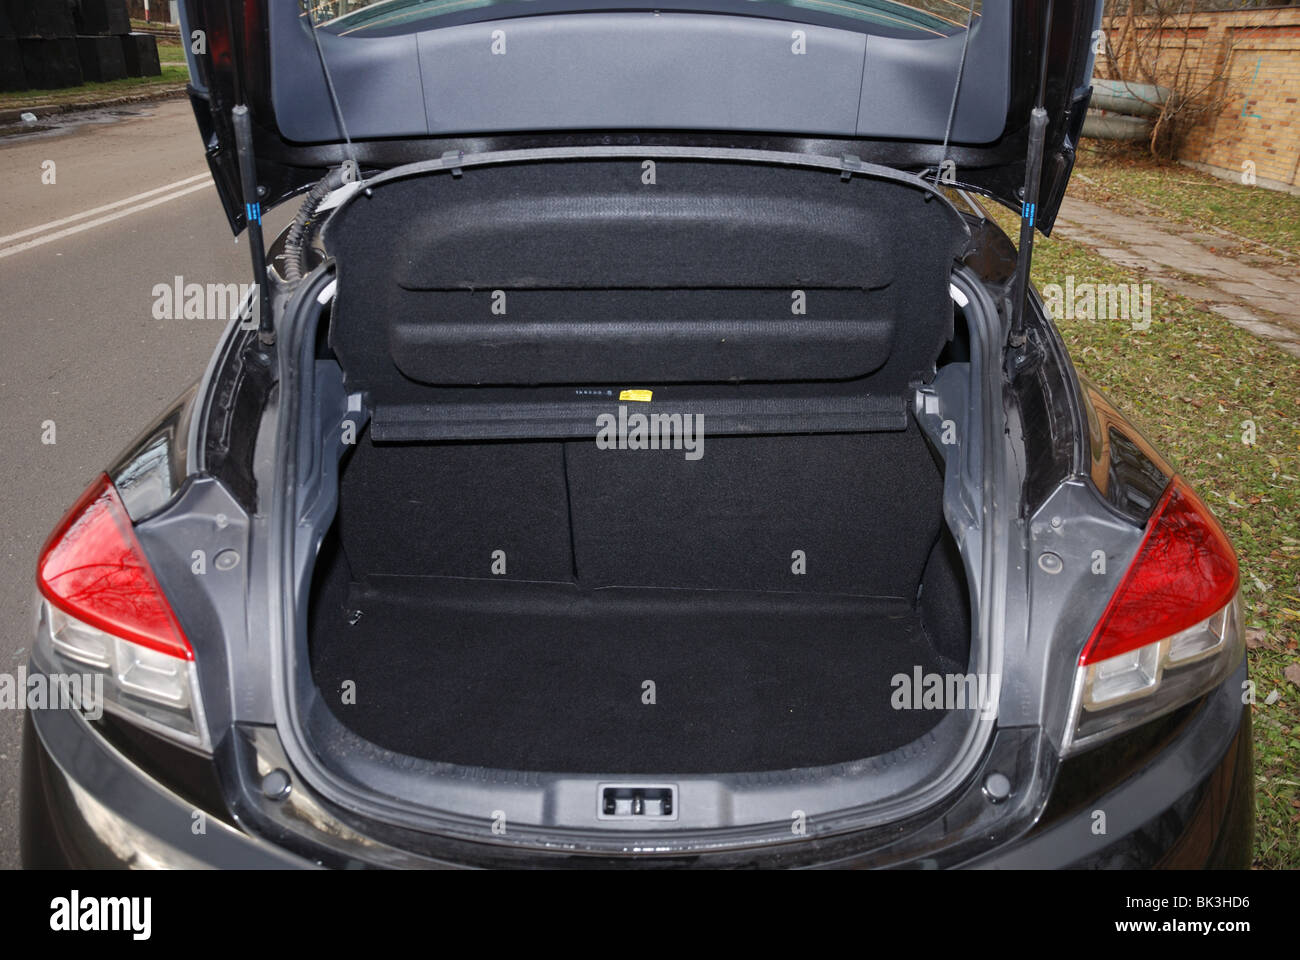 street, - two MY - trunk, Renault TCE Photo 2.0 Alamy compact - Stock (2D) French 2009 black boot - - - III Megane coupe metallic Coupe on doors